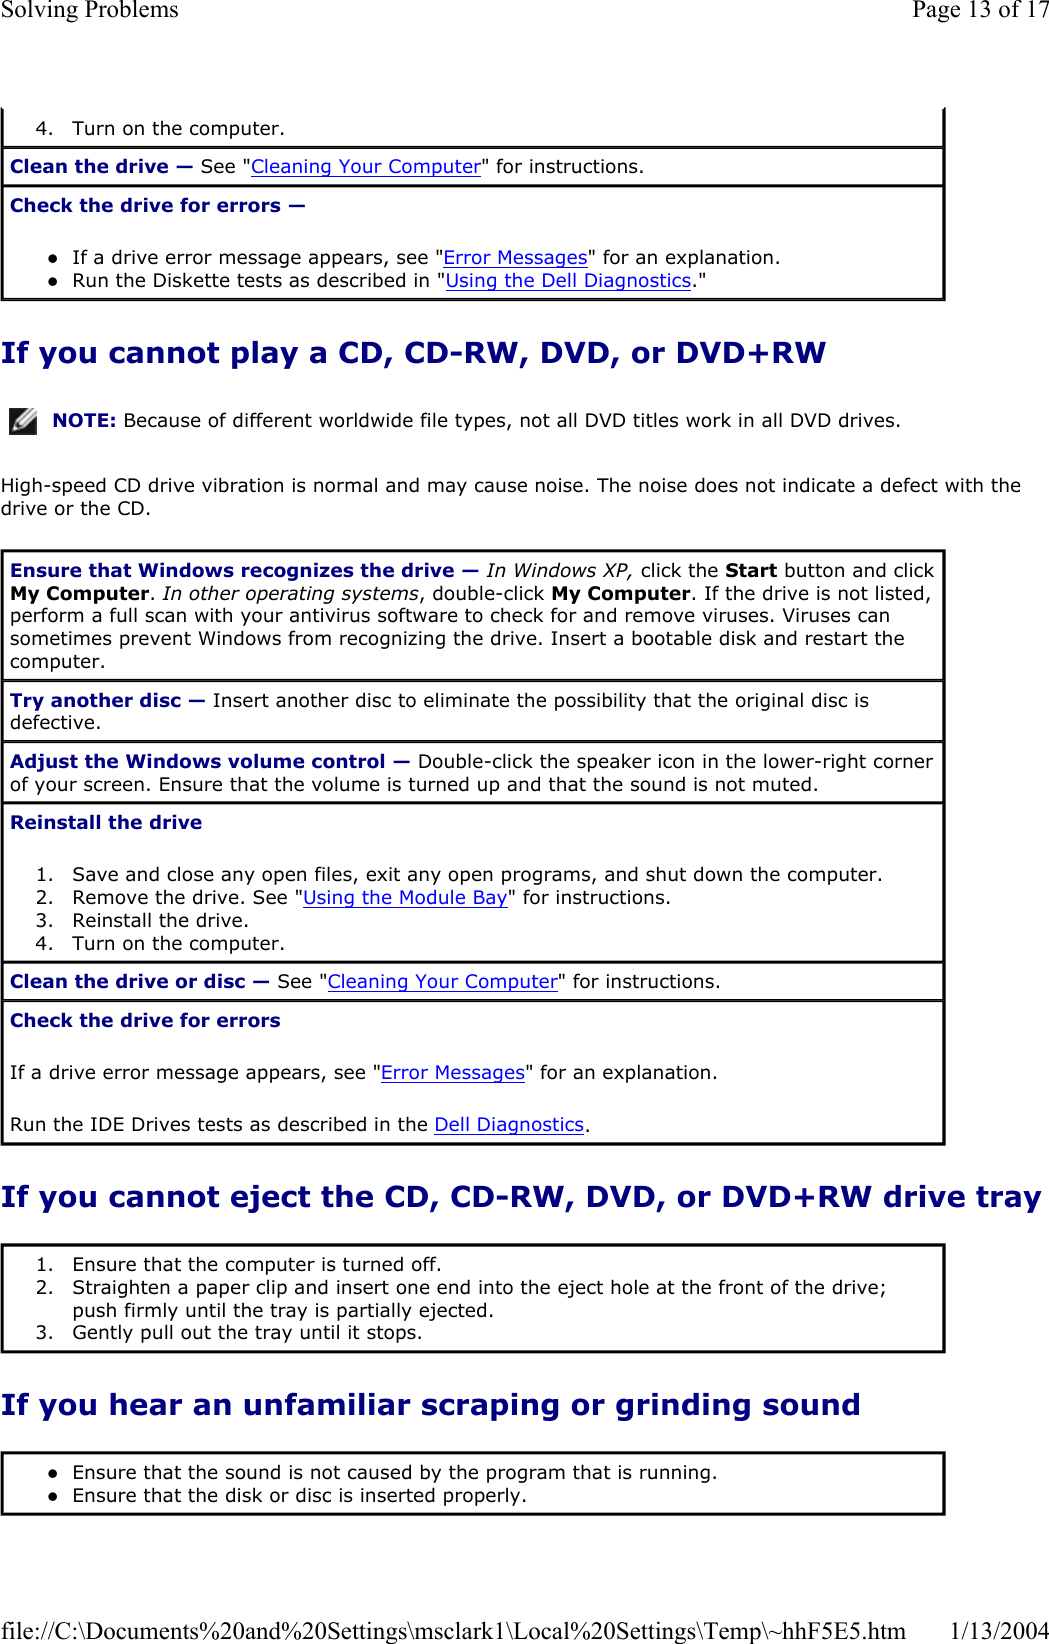 If you cannot play a CD, CD-RW, DVD, or DVD+RW High-speed CD drive vibration is normal and may cause noise. The noise does not indicate a defect with the drive or the CD. If you cannot eject the CD, CD-RW, DVD, or DVD+RW drive trayIf you hear an unfamiliar scraping or grinding sound 4. Turn on the computer.  Clean the drive — See &quot;Cleaning Your Computer&quot; for instructions.  Check the drive for errors —zIf a drive error message appears, see &quot;Error Messages&quot; for an explanation.  zRun the Diskette tests as described in &quot;Using the Dell Diagnostics.&quot;  NOTE: Because of different worldwide file types, not all DVD titles work in all DVD drives.Ensure that Windows recognizes the drive — In Windows XP, click the Start button and click My Computer.In other operating systems, double-click My Computer. If the drive is not listed, perform a full scan with your antivirus software to check for and remove viruses. Viruses can sometimes prevent Windows from recognizing the drive. Insert a bootable disk and restart the computer.Try another disc — Insert another disc to eliminate the possibility that the original disc is defective. Adjust the Windows volume control — Double-click the speaker icon in the lower-right corner of your screen. Ensure that the volume is turned up and that the sound is not muted.  Reinstall the drive1. Save and close any open files, exit any open programs, and shut down the computer.  2. Remove the drive. See &quot;Using the Module Bay&quot; for instructions.  3. Reinstall the drive.  4. Turn on the computer.  Clean the drive or disc — See &quot;Cleaning Your Computer&quot; for instructions.  Check the drive for errorsIf a drive error message appears, see &quot;Error Messages&quot; for an explanation. Run the IDE Drives tests as described in the Dell Diagnostics.1. Ensure that the computer is turned off.  2. Straighten a paper clip and insert one end into the eject hole at the front of the drive; push firmly until the tray is partially ejected.  3. Gently pull out the tray until it stops.  zEnsure that the sound is not caused by the program that is running.  zEnsure that the disk or disc is inserted properly.  Page 13 of 17Solving Problems1/13/2004file://C:\Documents%20and%20Settings\msclark1\Local%20Settings\Temp\~hhF5E5.htm